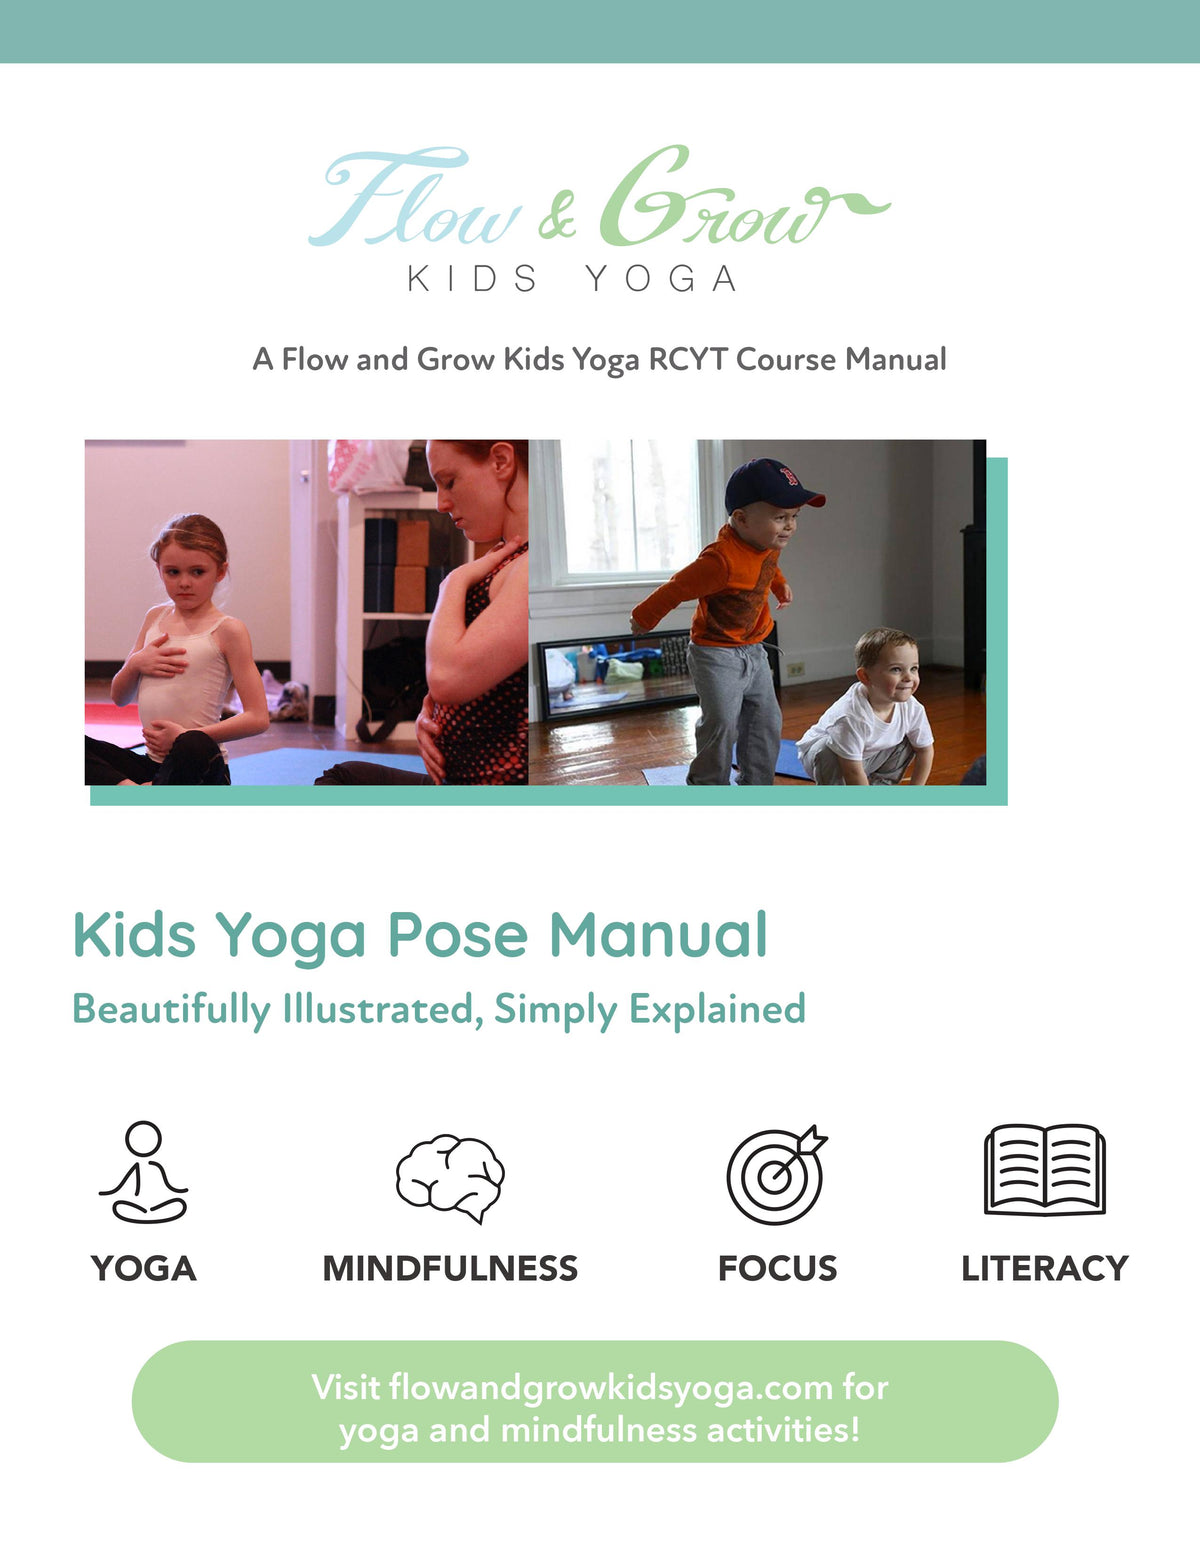 5 Garden Yoga Poses for Kids Using a Chair | Kids yoga poses, Yoga for  kids, Yoga lessons